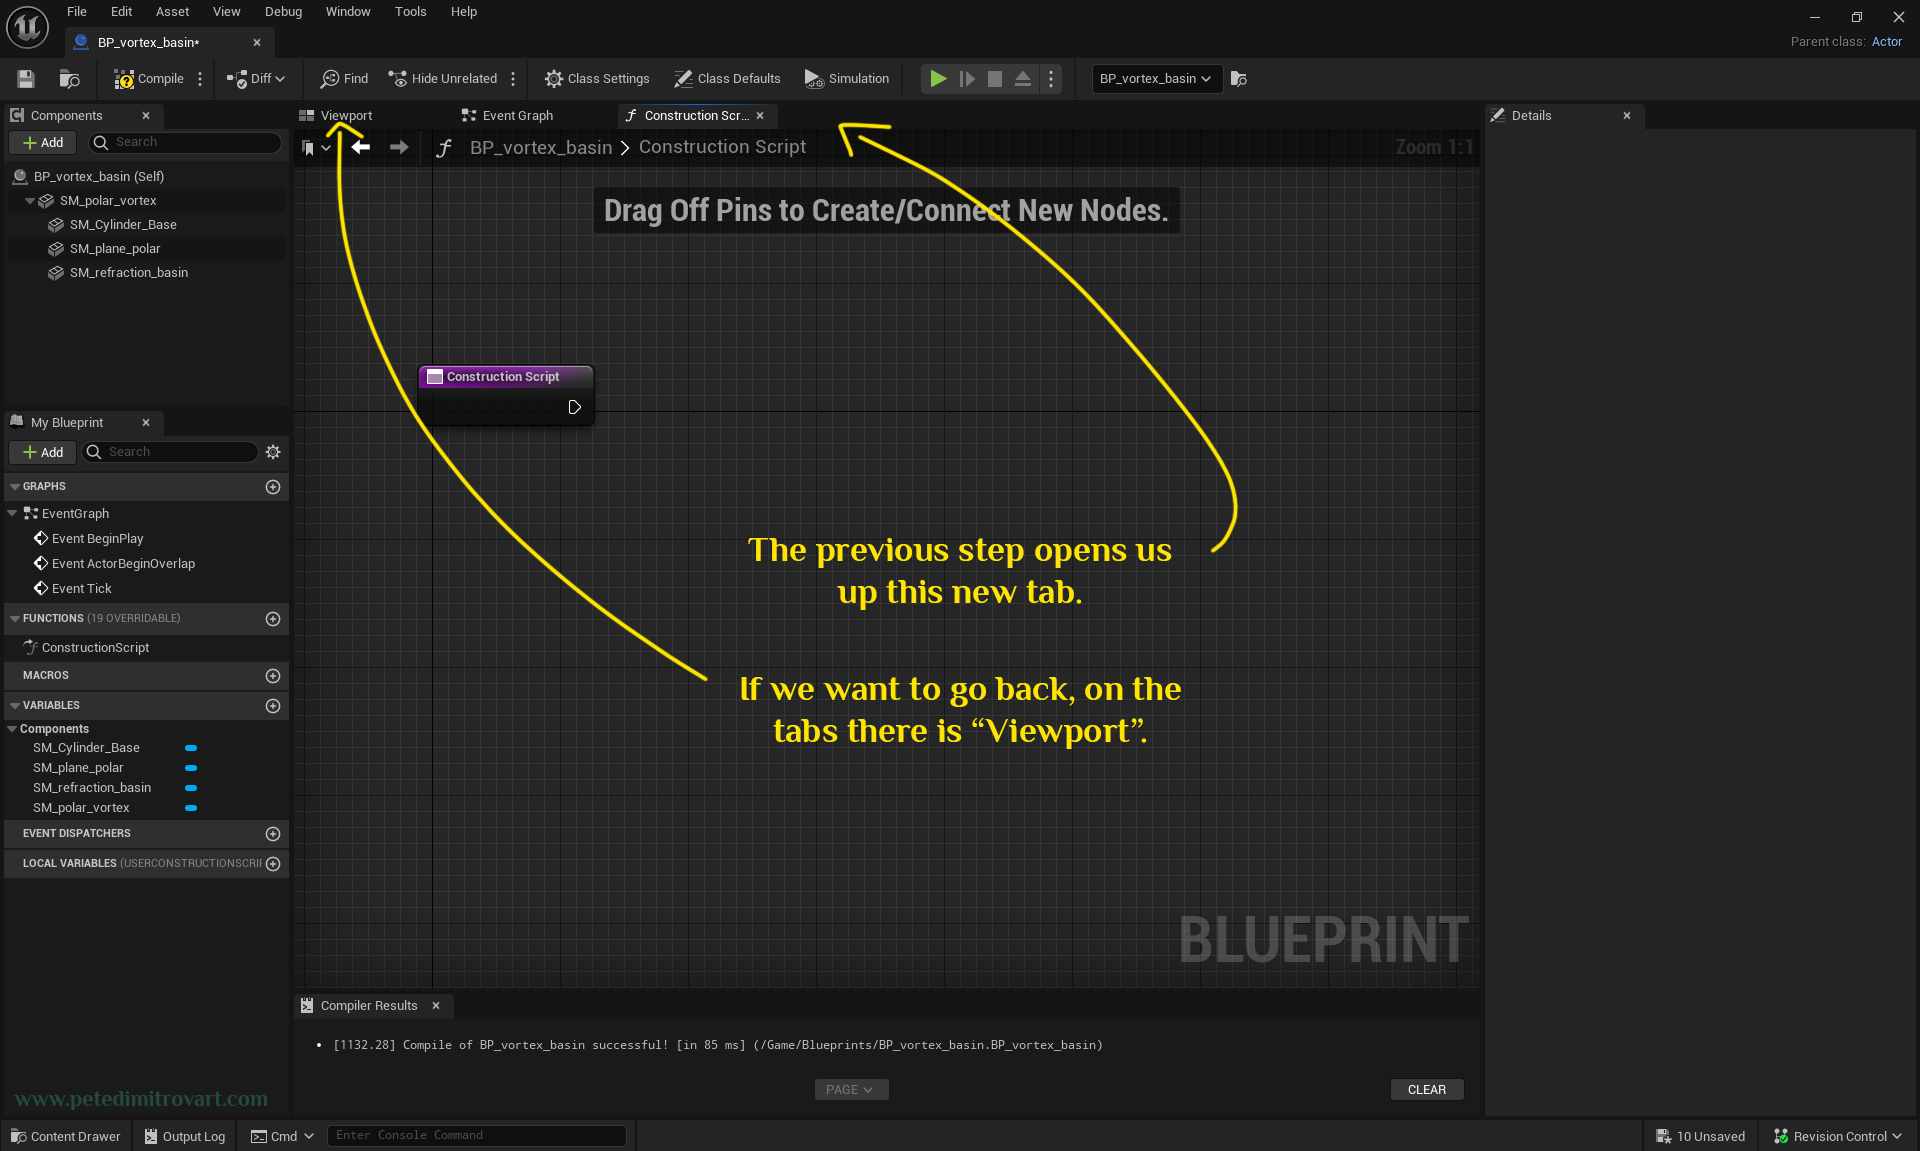 Newly opened construction scrip tab inside the blueprint. Shows a mostly empty nodes board on which there is only a purple construction script node. Arrows point at the UI elements for changing between the different blueprint tabs.